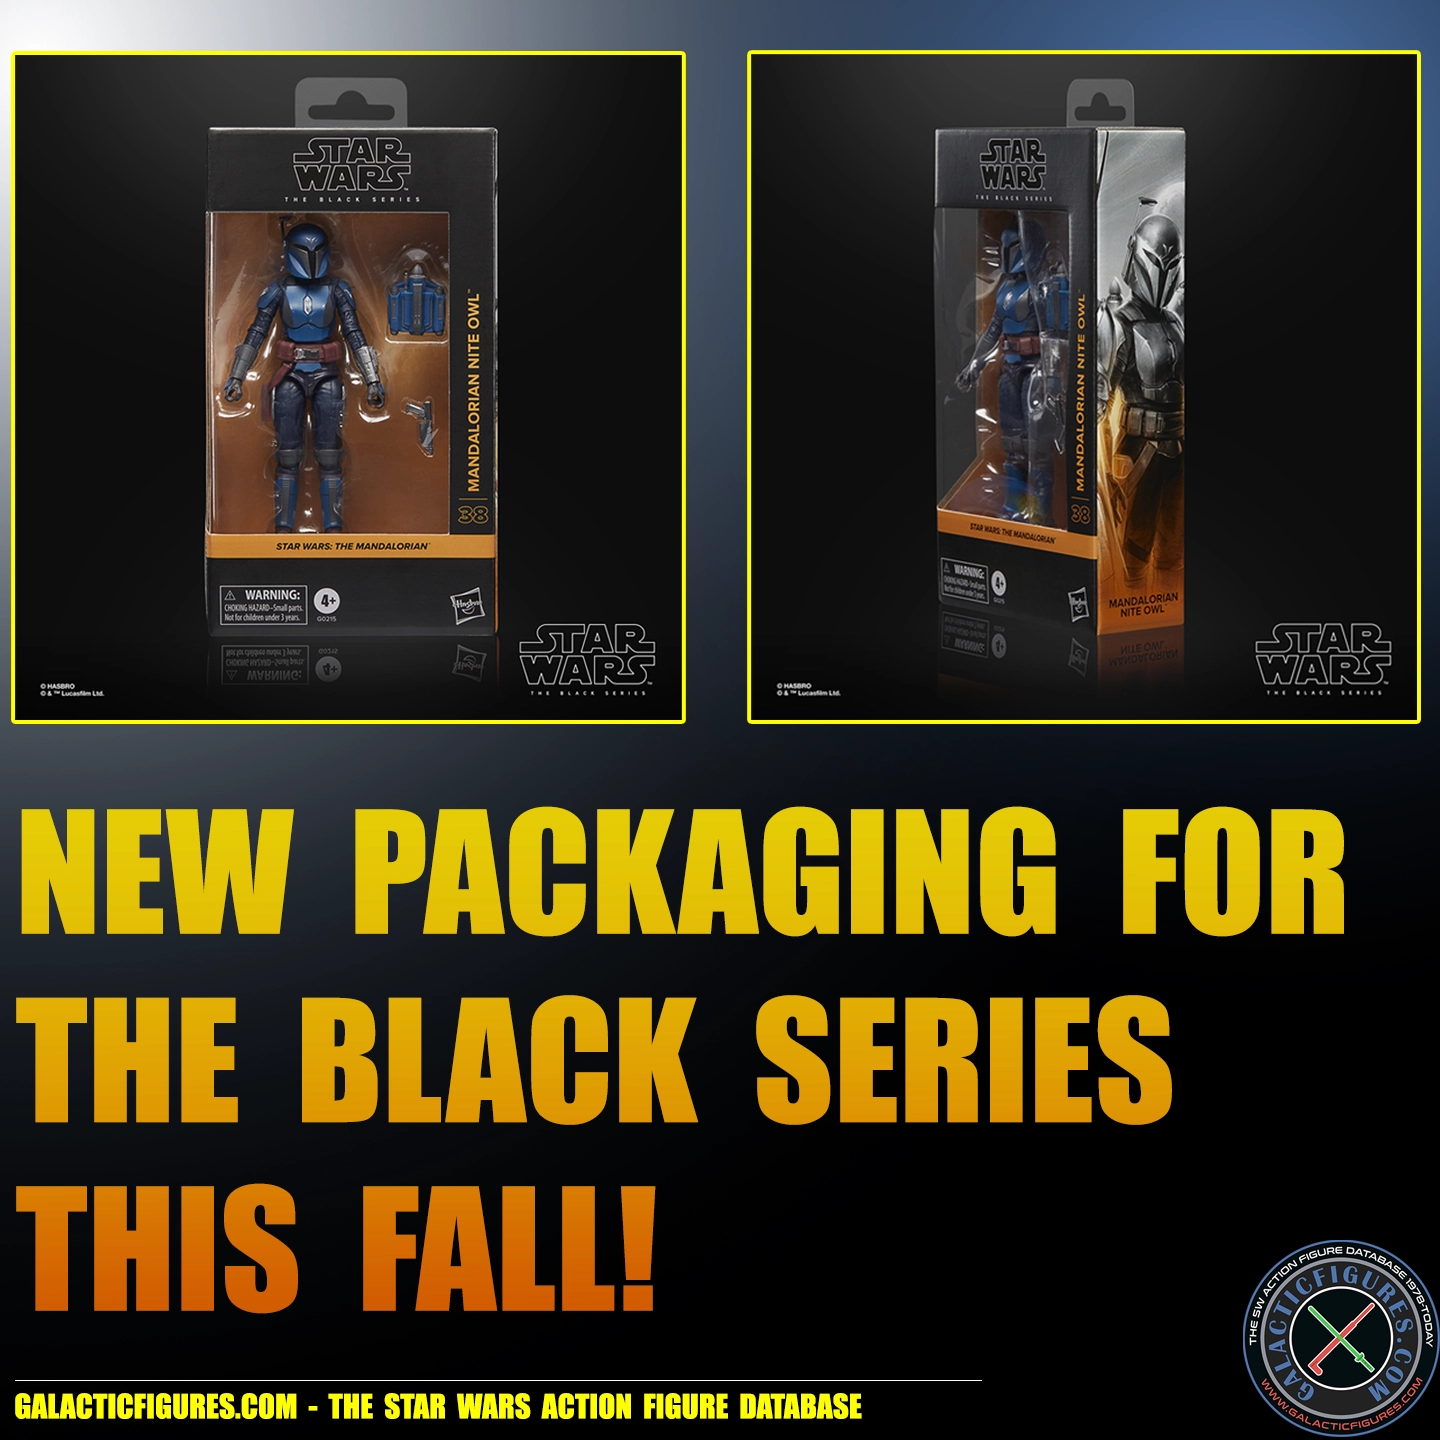 New Packaging Revealed For Black Series!